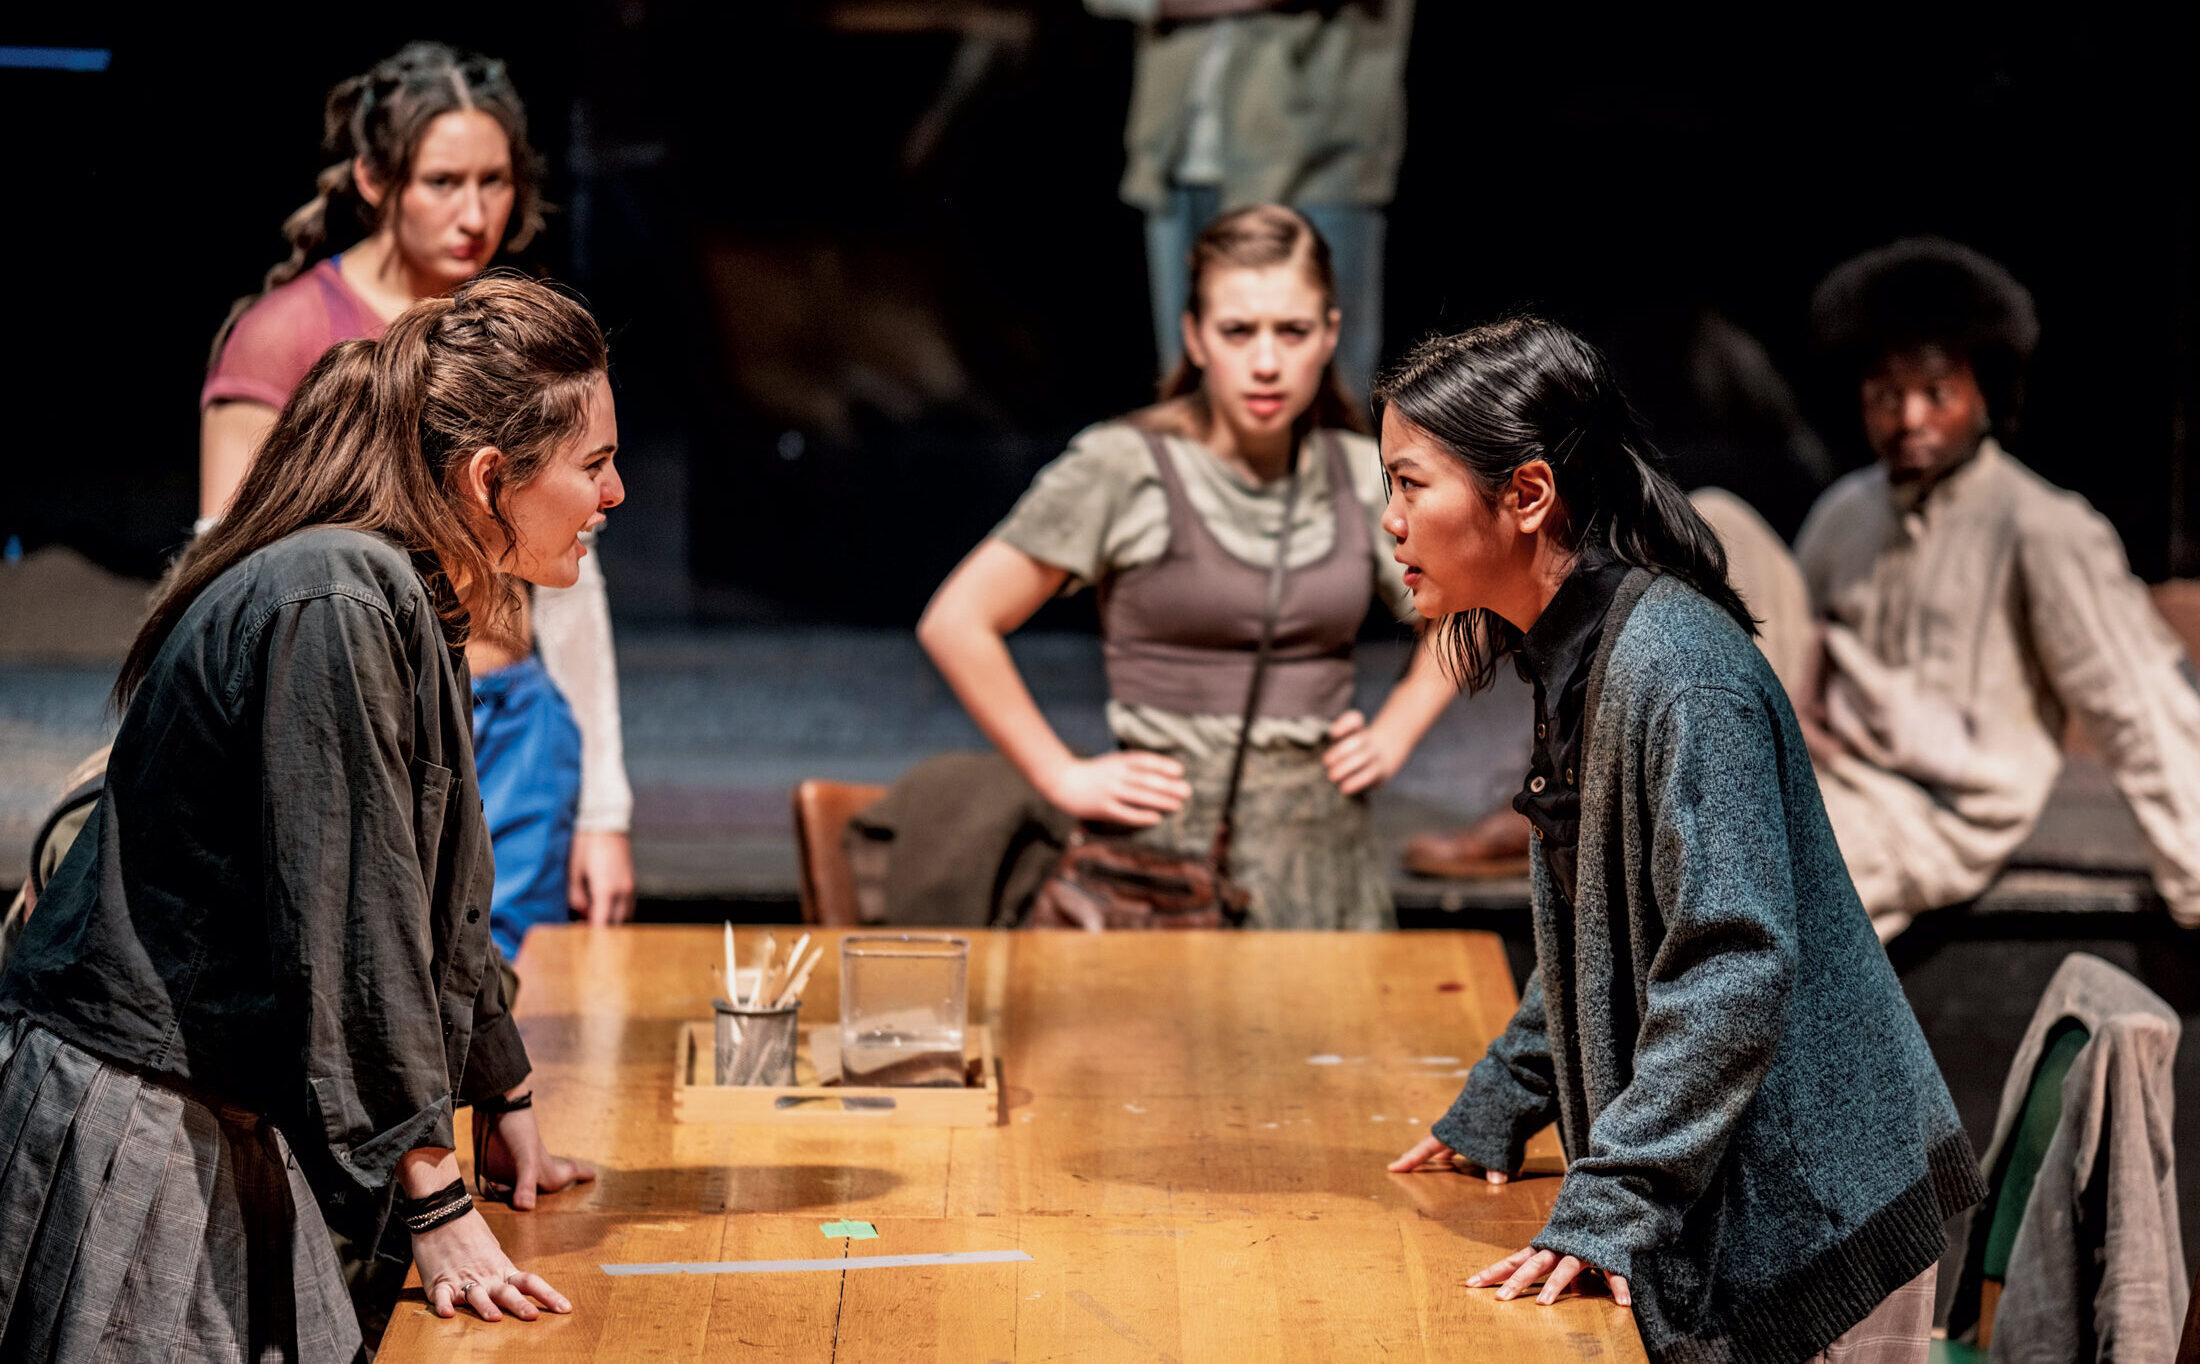 Students acting in a scene from The Trials. Two students appear to be in confrontation across a wooden table, with other students in the background, watching the pair.